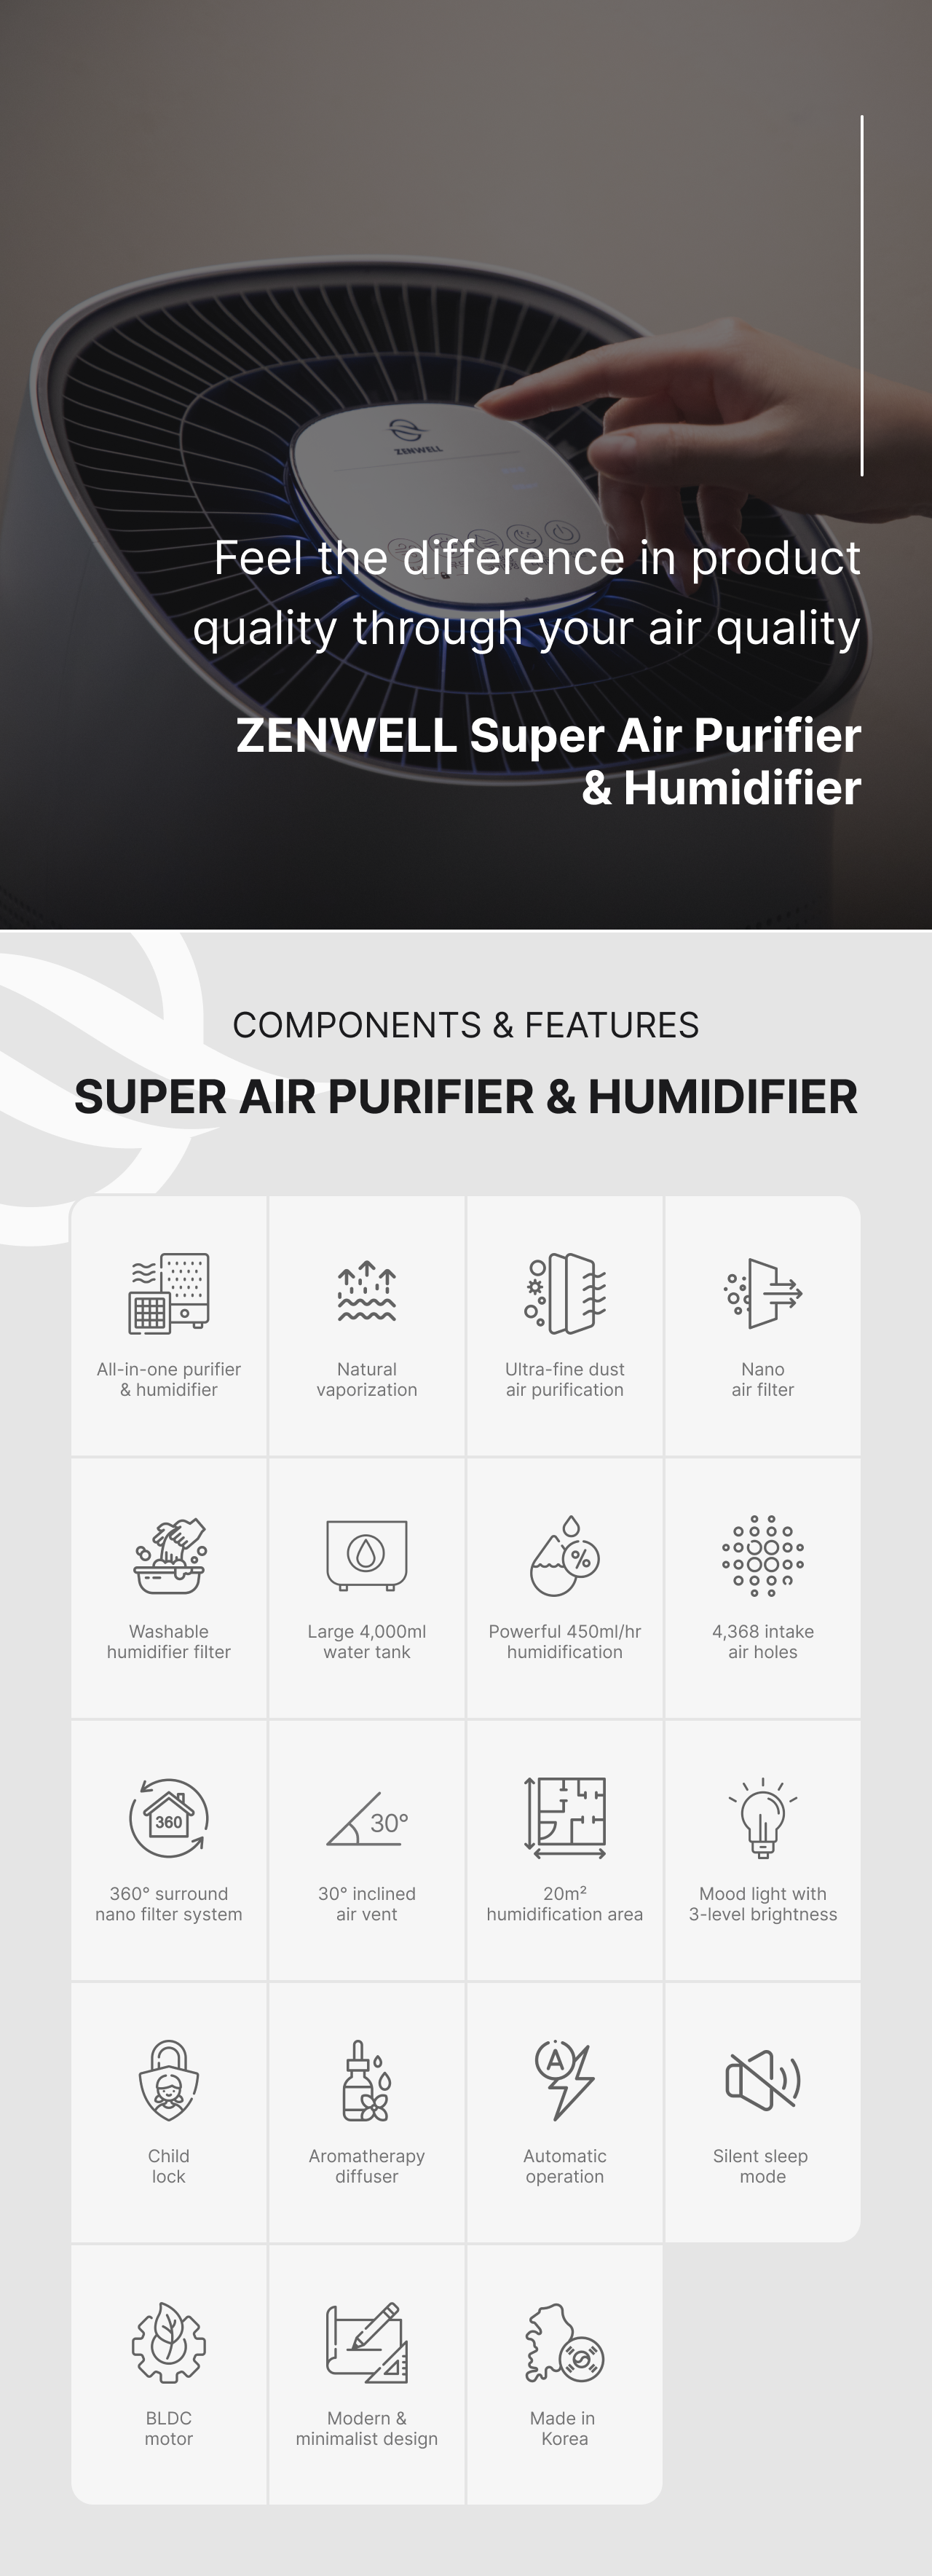 Super Air Purifier and Humidifier Smart feature chart including All-in-one purifier & humidifier, Natural vaporization, Ultra-fine dust air purification, Nano air filter, Washable humidifier filter, 4,000ml water tank, 450ml/hr humidification, 4,368 intake holes, 360° surround nano filter, 30° inclined air vent, 20 square meter humidification area, Mood light, Child lock, Aromatherapy diffuser, Automatic operation, Silent sleep mode, BLDC motor, Modern & minimalist design, and Made in Korea